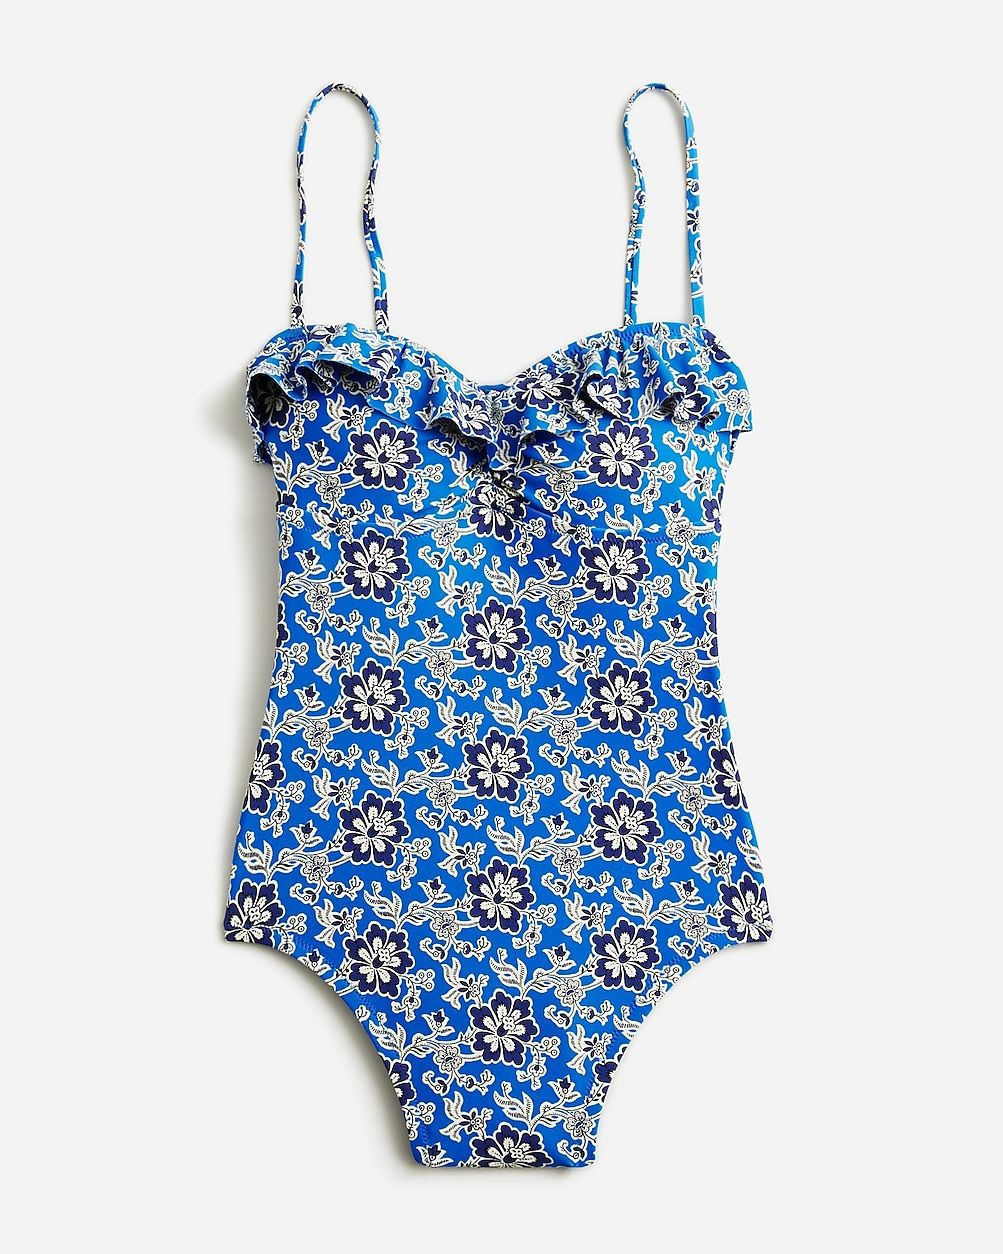 Ruffle one-piece swimsuit in cobalt floral | J.Crew US